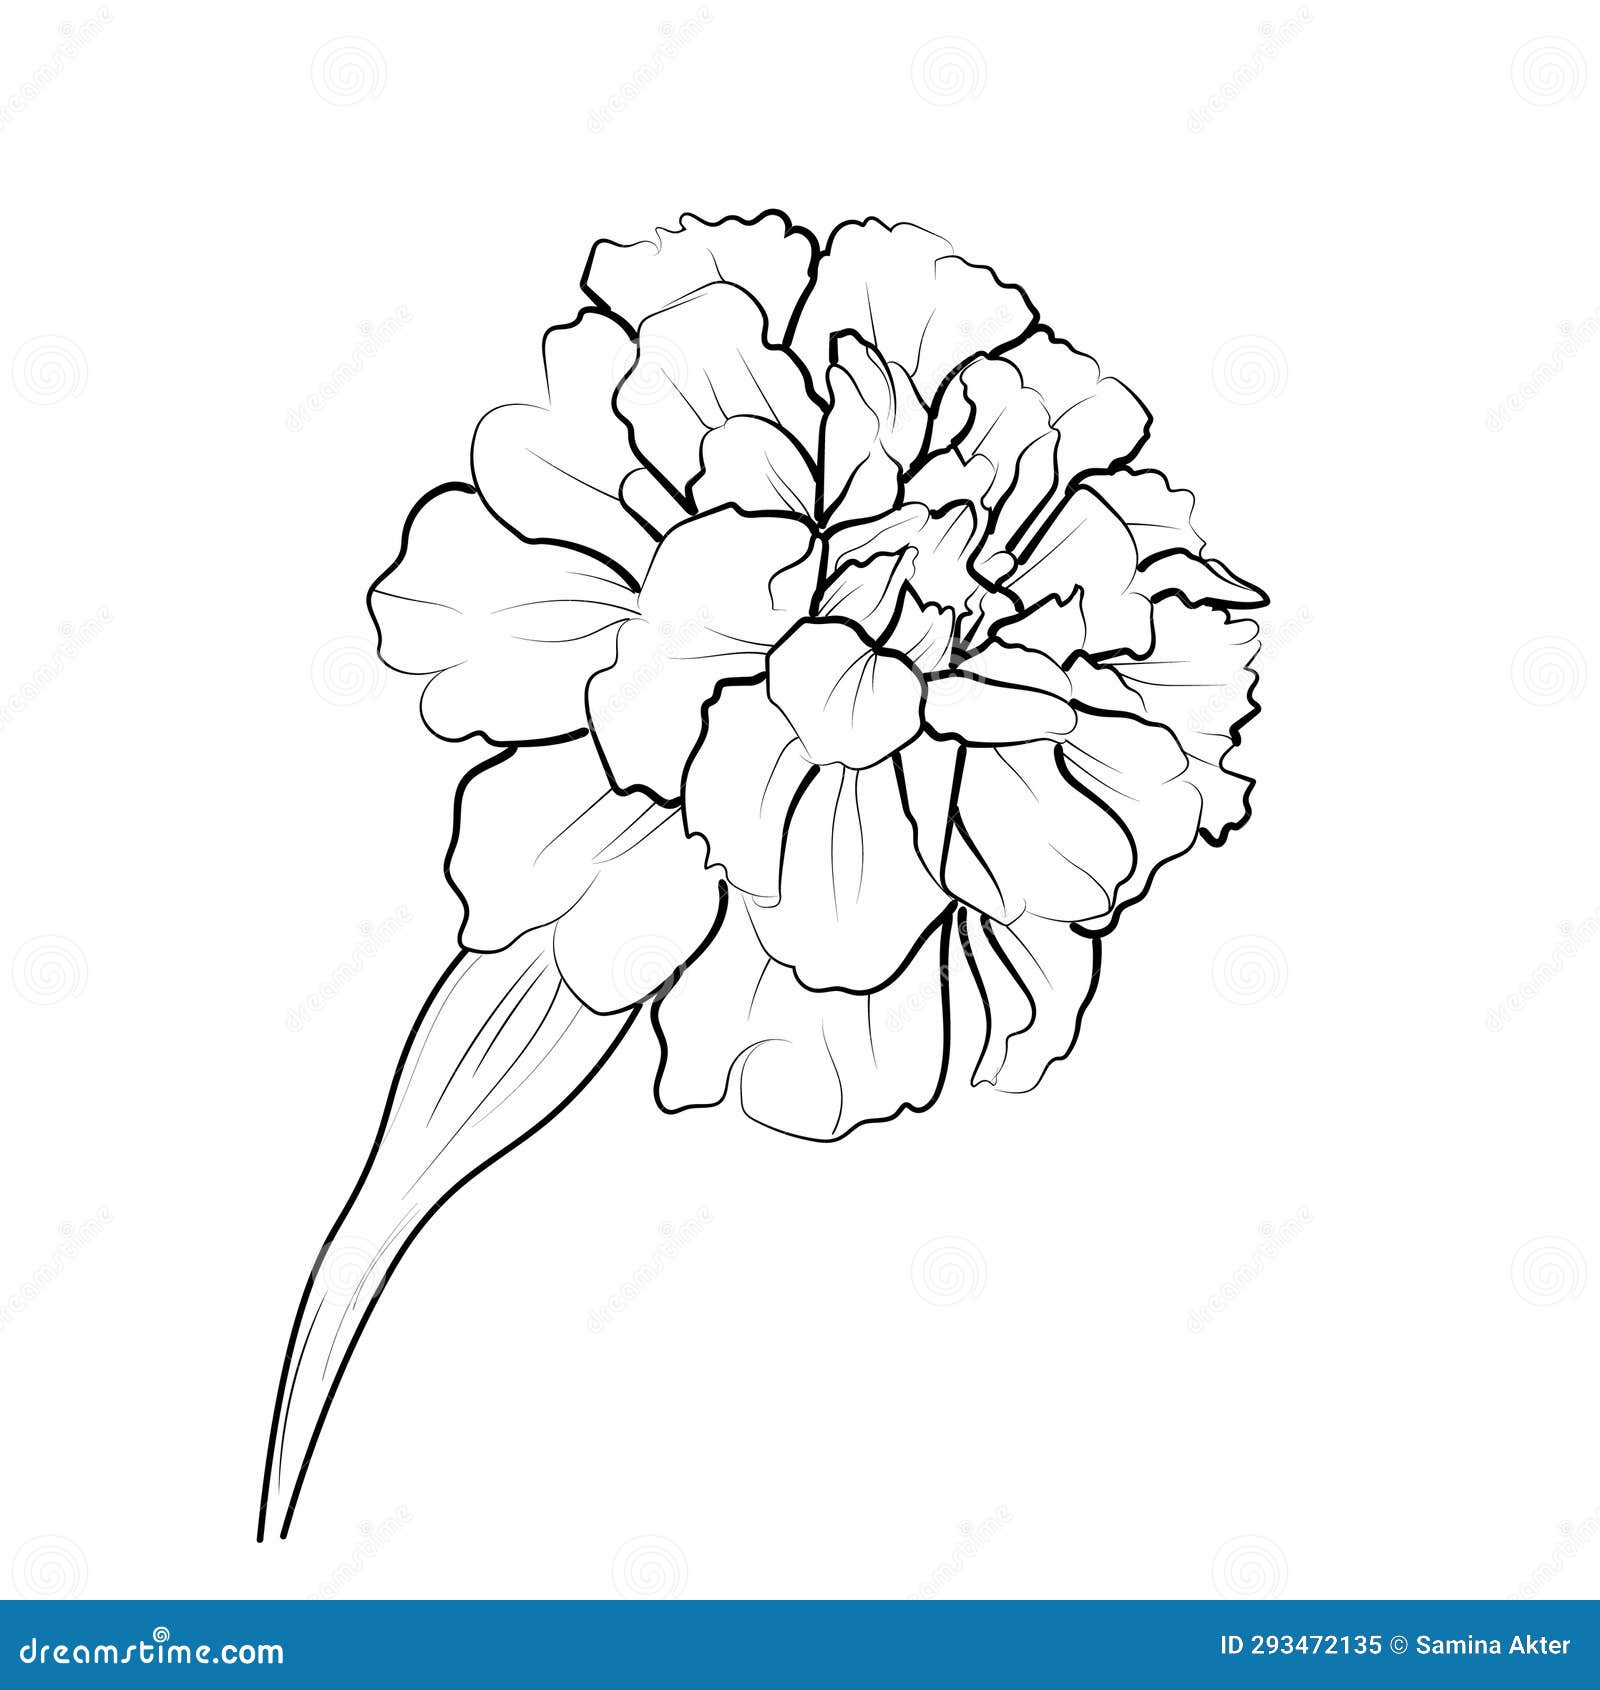 Marigold Drawing, Easy Marigold Flower Drawing Easy for Kids, Flower ...